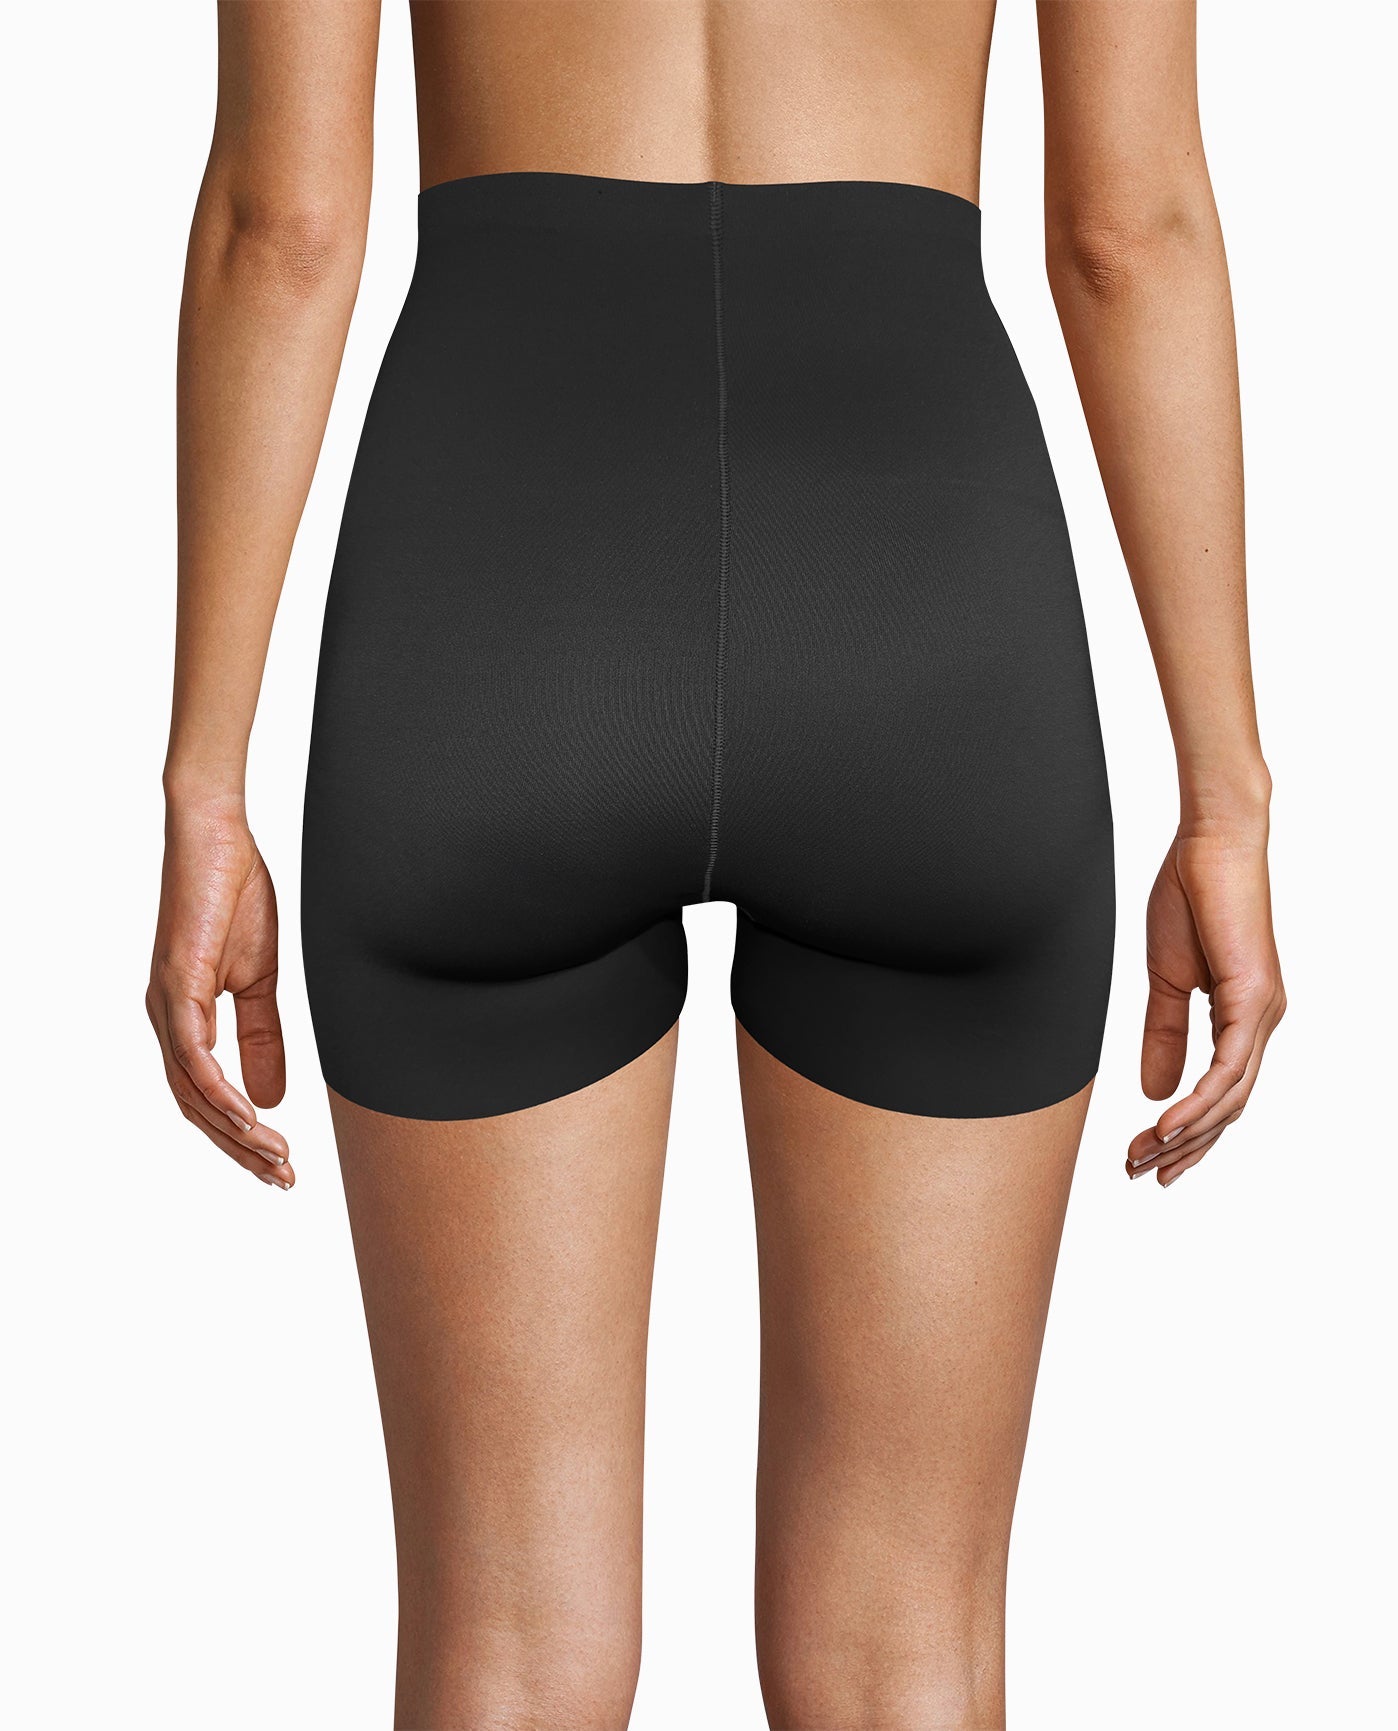 Emerson Women's Shaping Shorts 2 Pack - Black & Nude